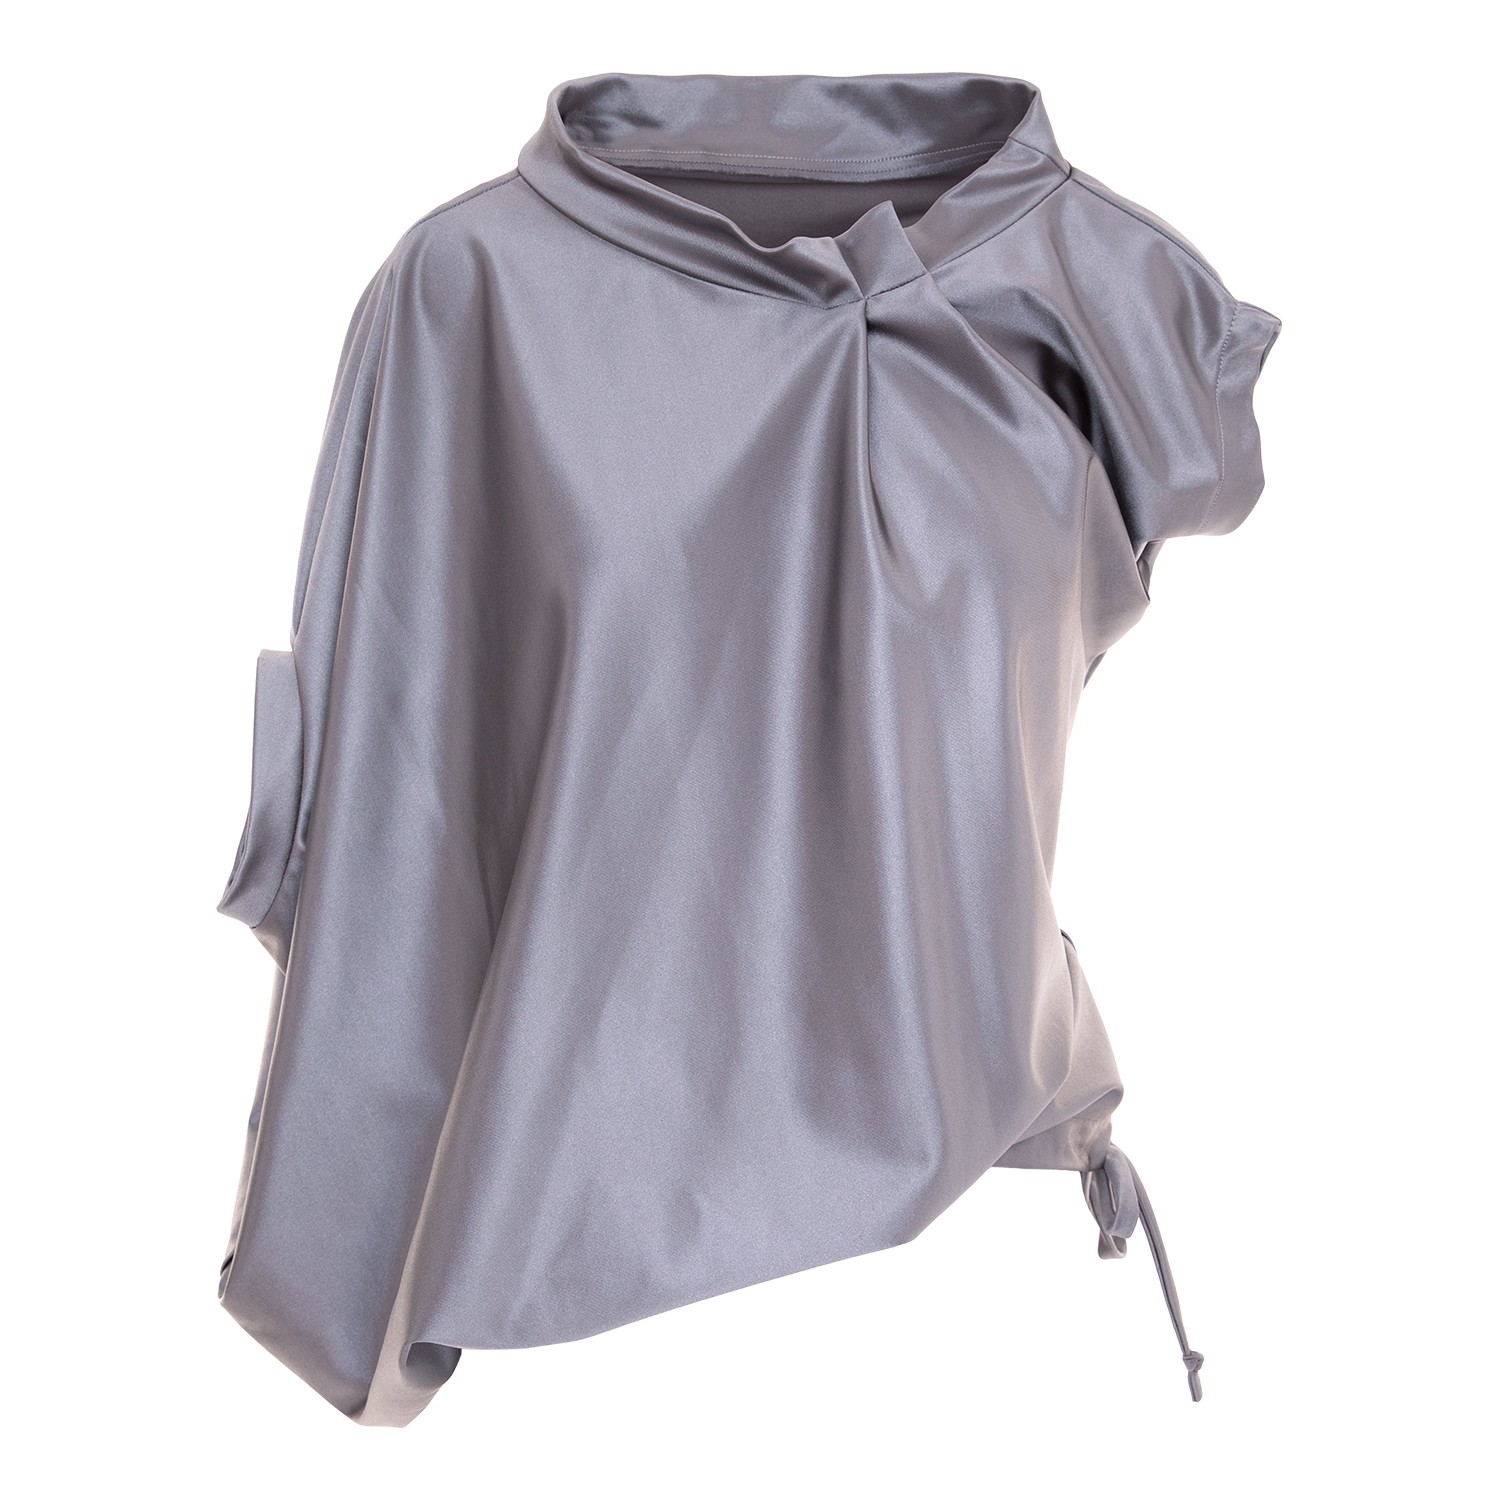 Women’s Grey / Silver Asymmetric Oversized Blouse With Pleated Collar Small Silvia Serban